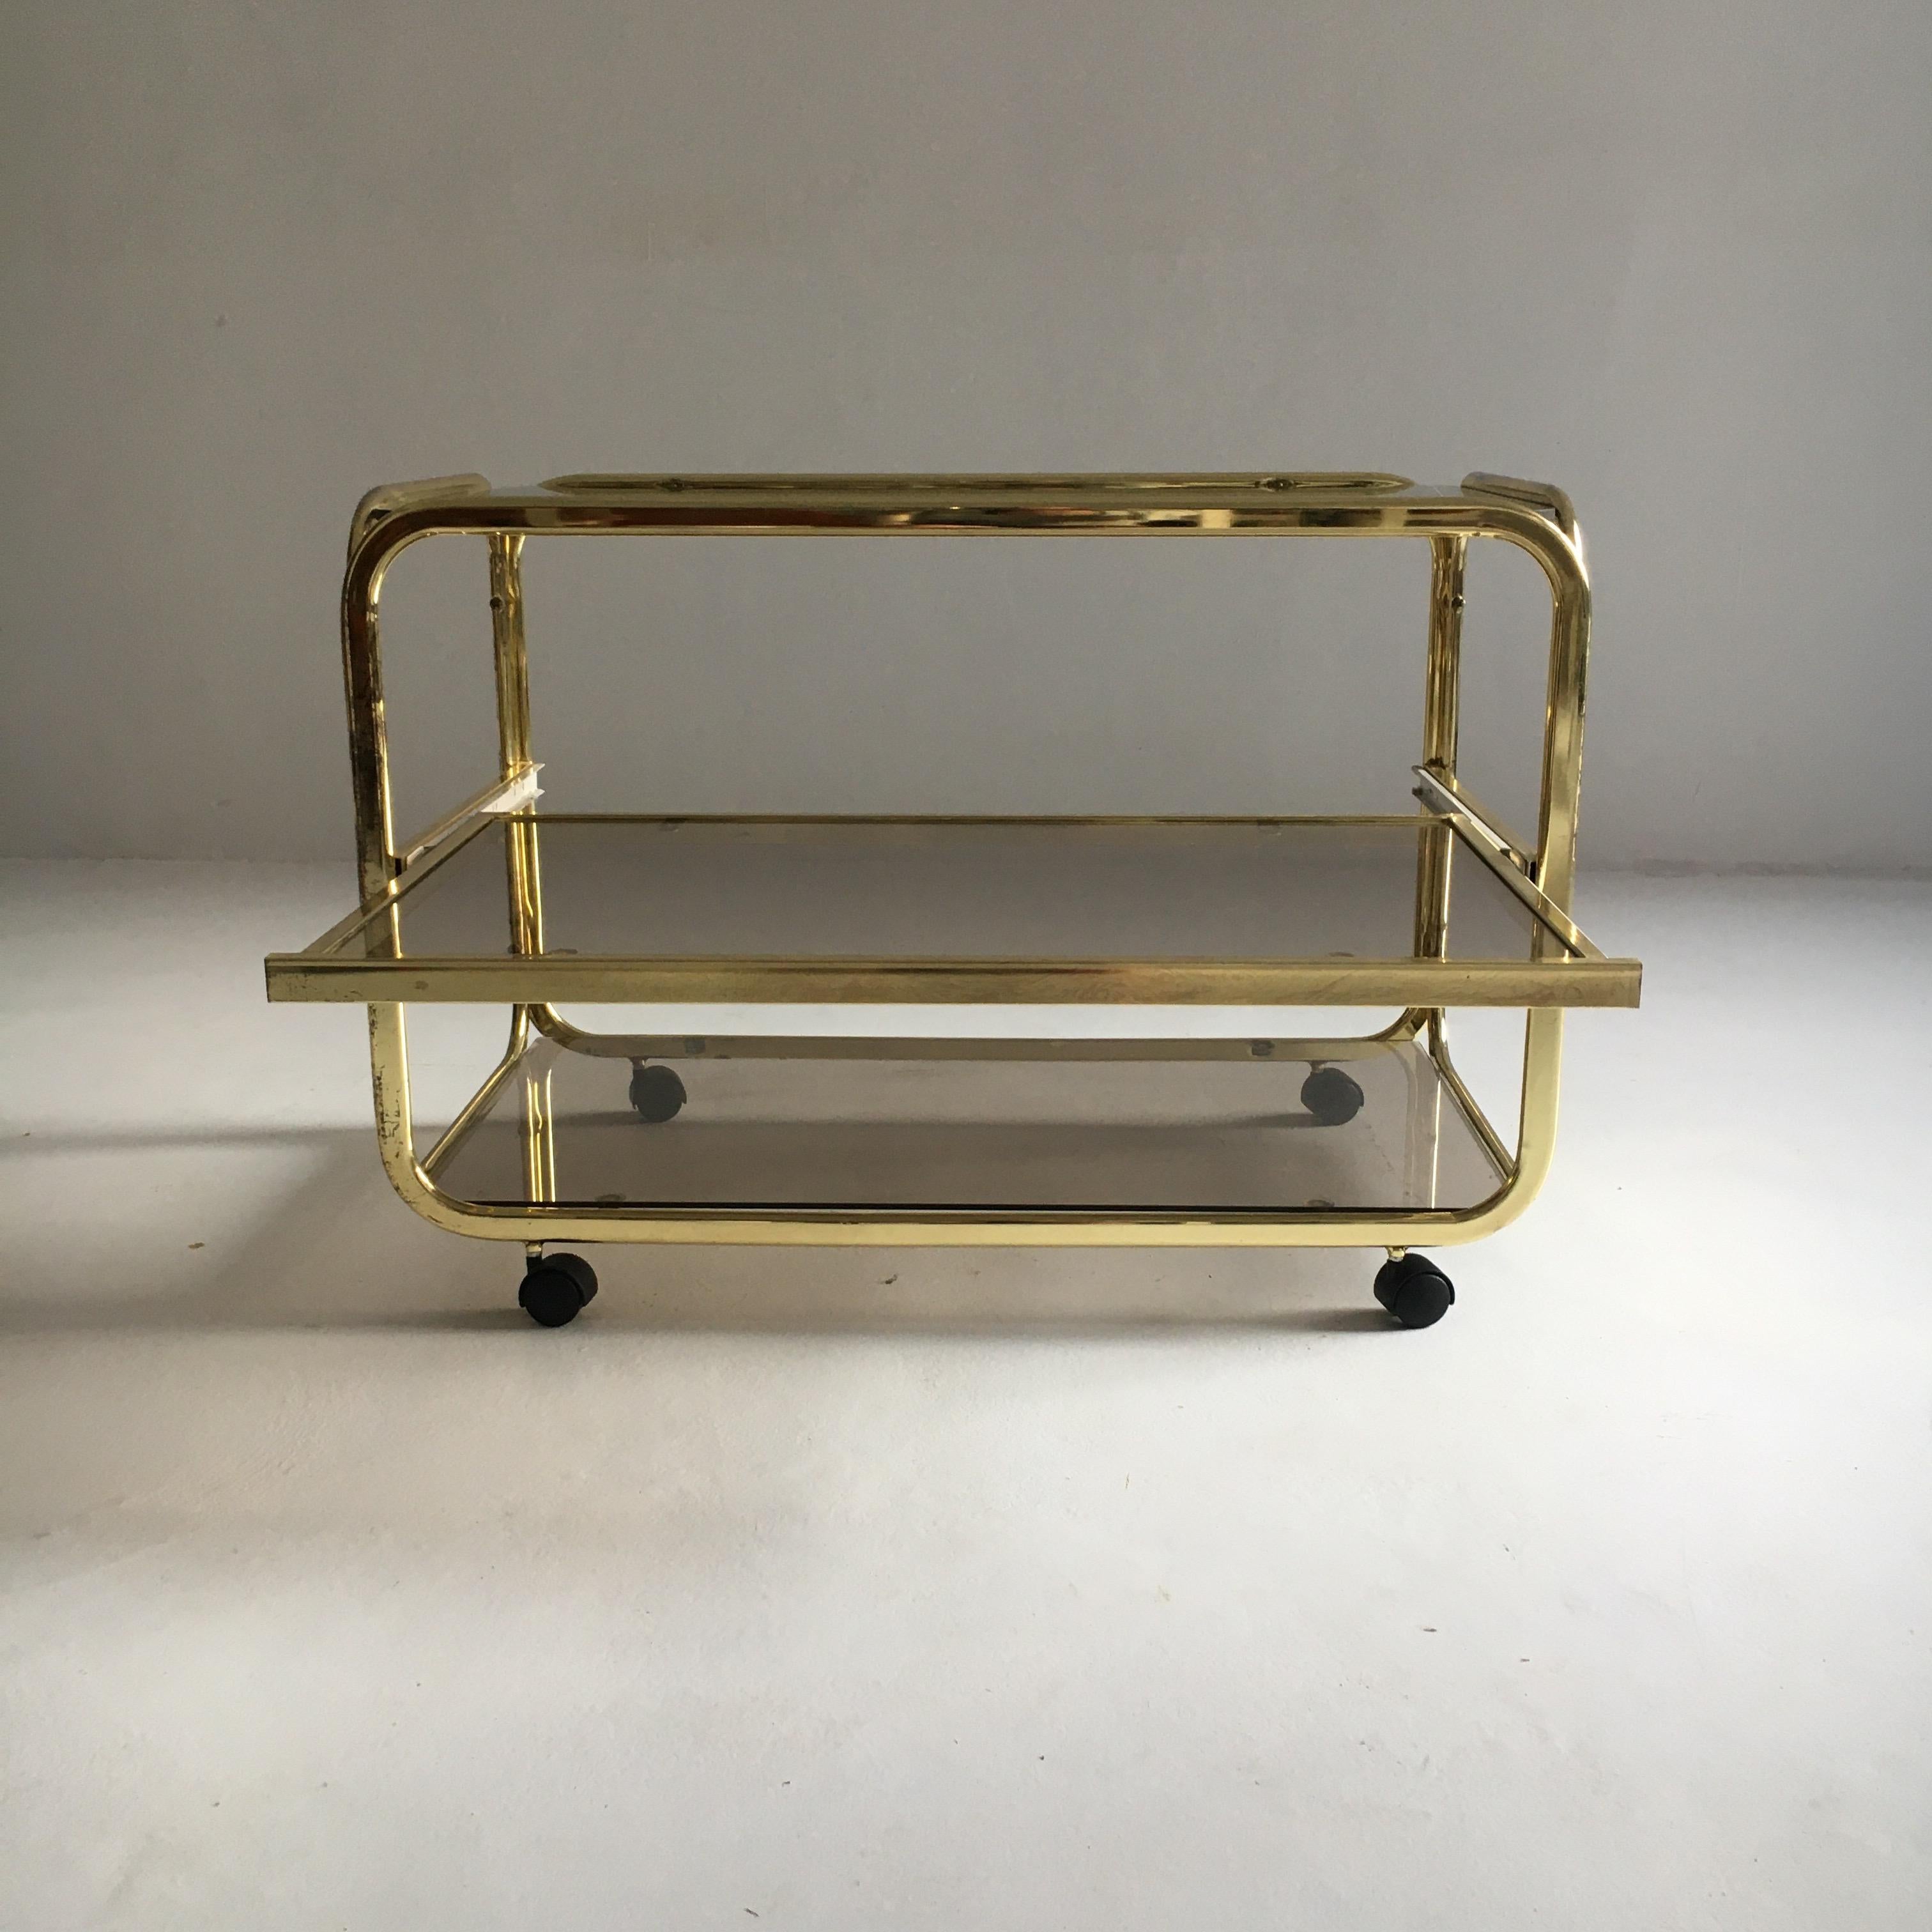 Italian Vintage Brass Plated Bar Cart Table Brown Smoked Glass Plates by Morex, 1970s For Sale